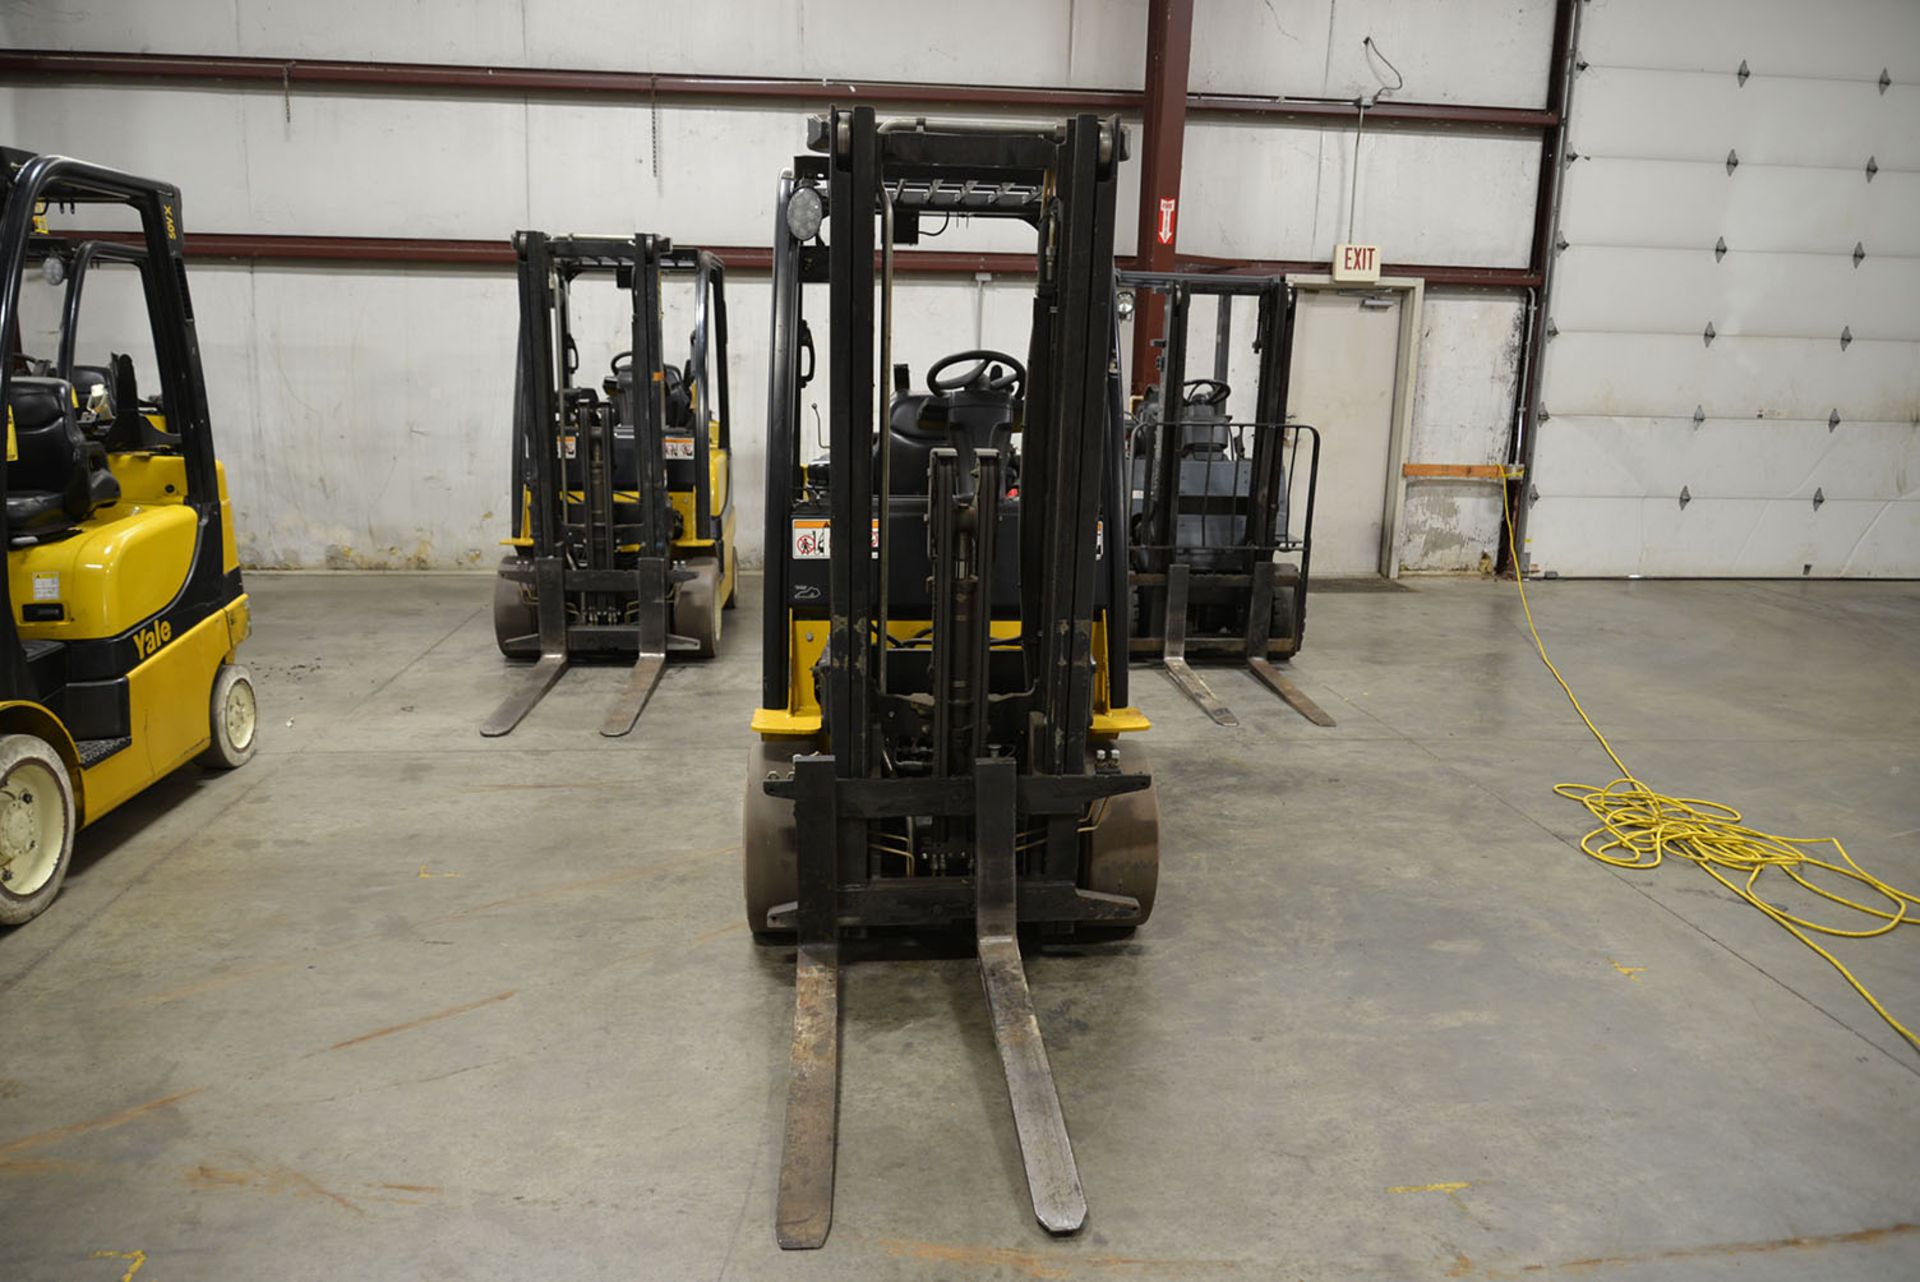 2008 YALE 5,000-lb. Capacity Forklift, Model GLC050VXNV, S/N A910V13933F, LPG, Solid Non-Marking - Image 3 of 5